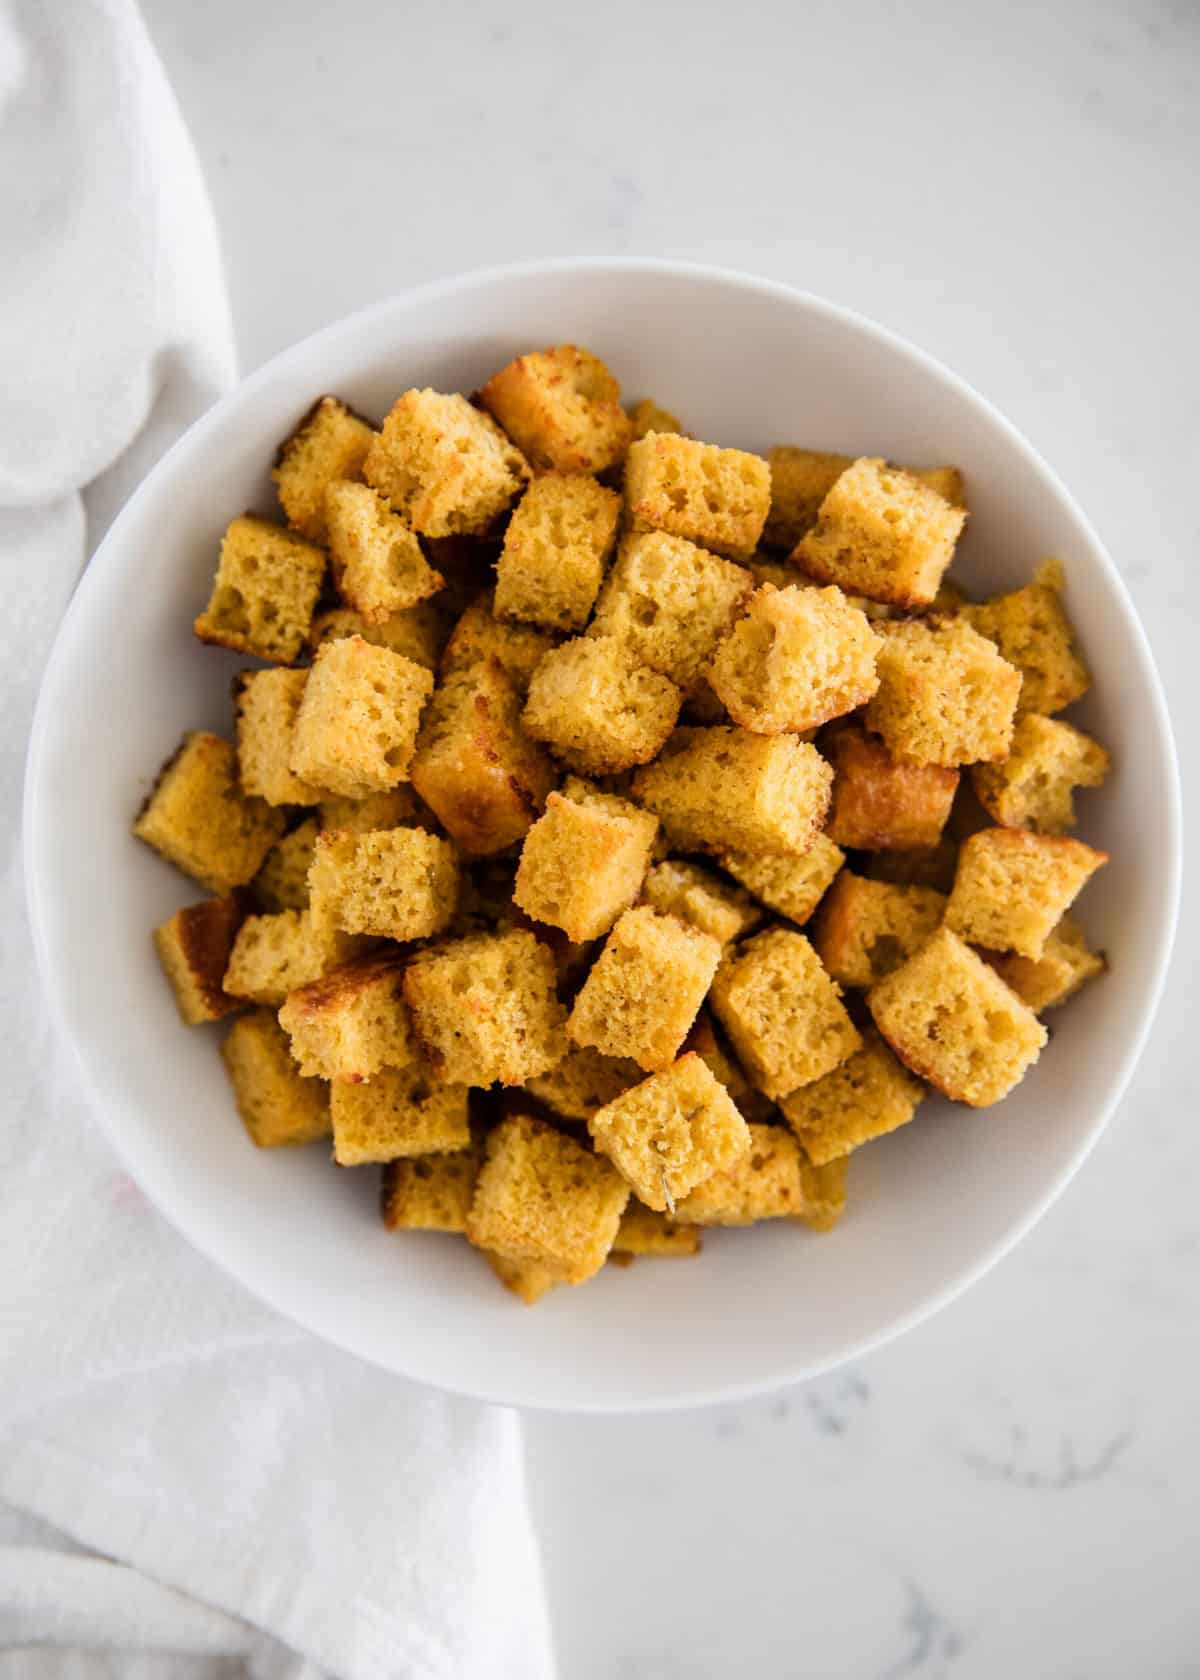 Cornbread croutons in bowl.